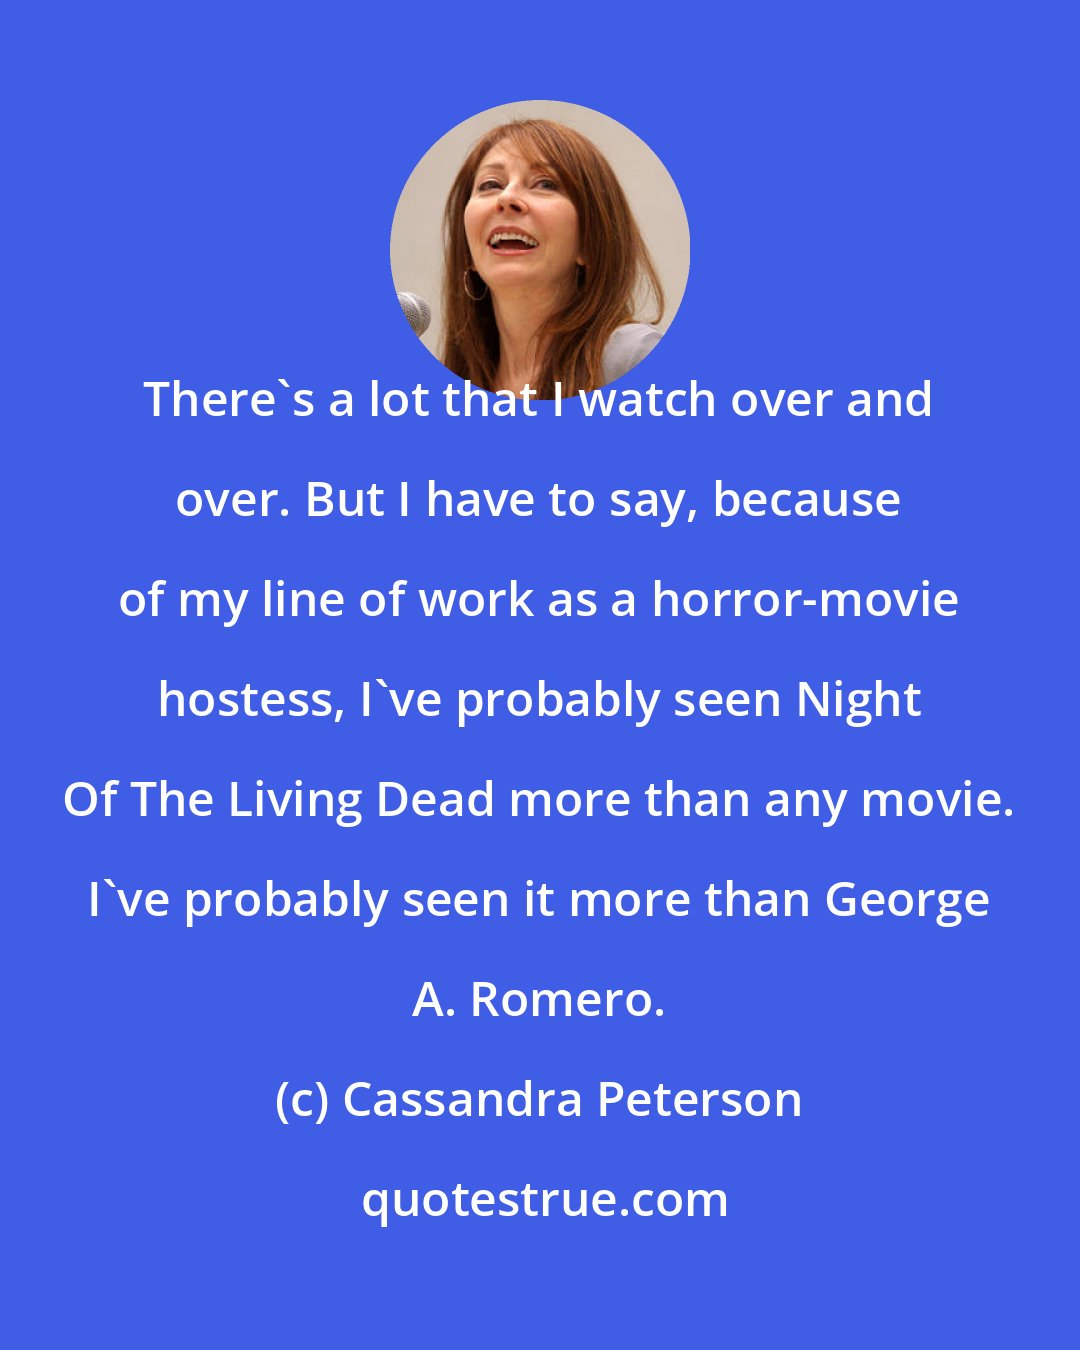 Cassandra Peterson: There's a lot that I watch over and over. But I have to say, because of my line of work as a horror-movie hostess, I've probably seen Night Of The Living Dead more than any movie. I've probably seen it more than George A. Romero.